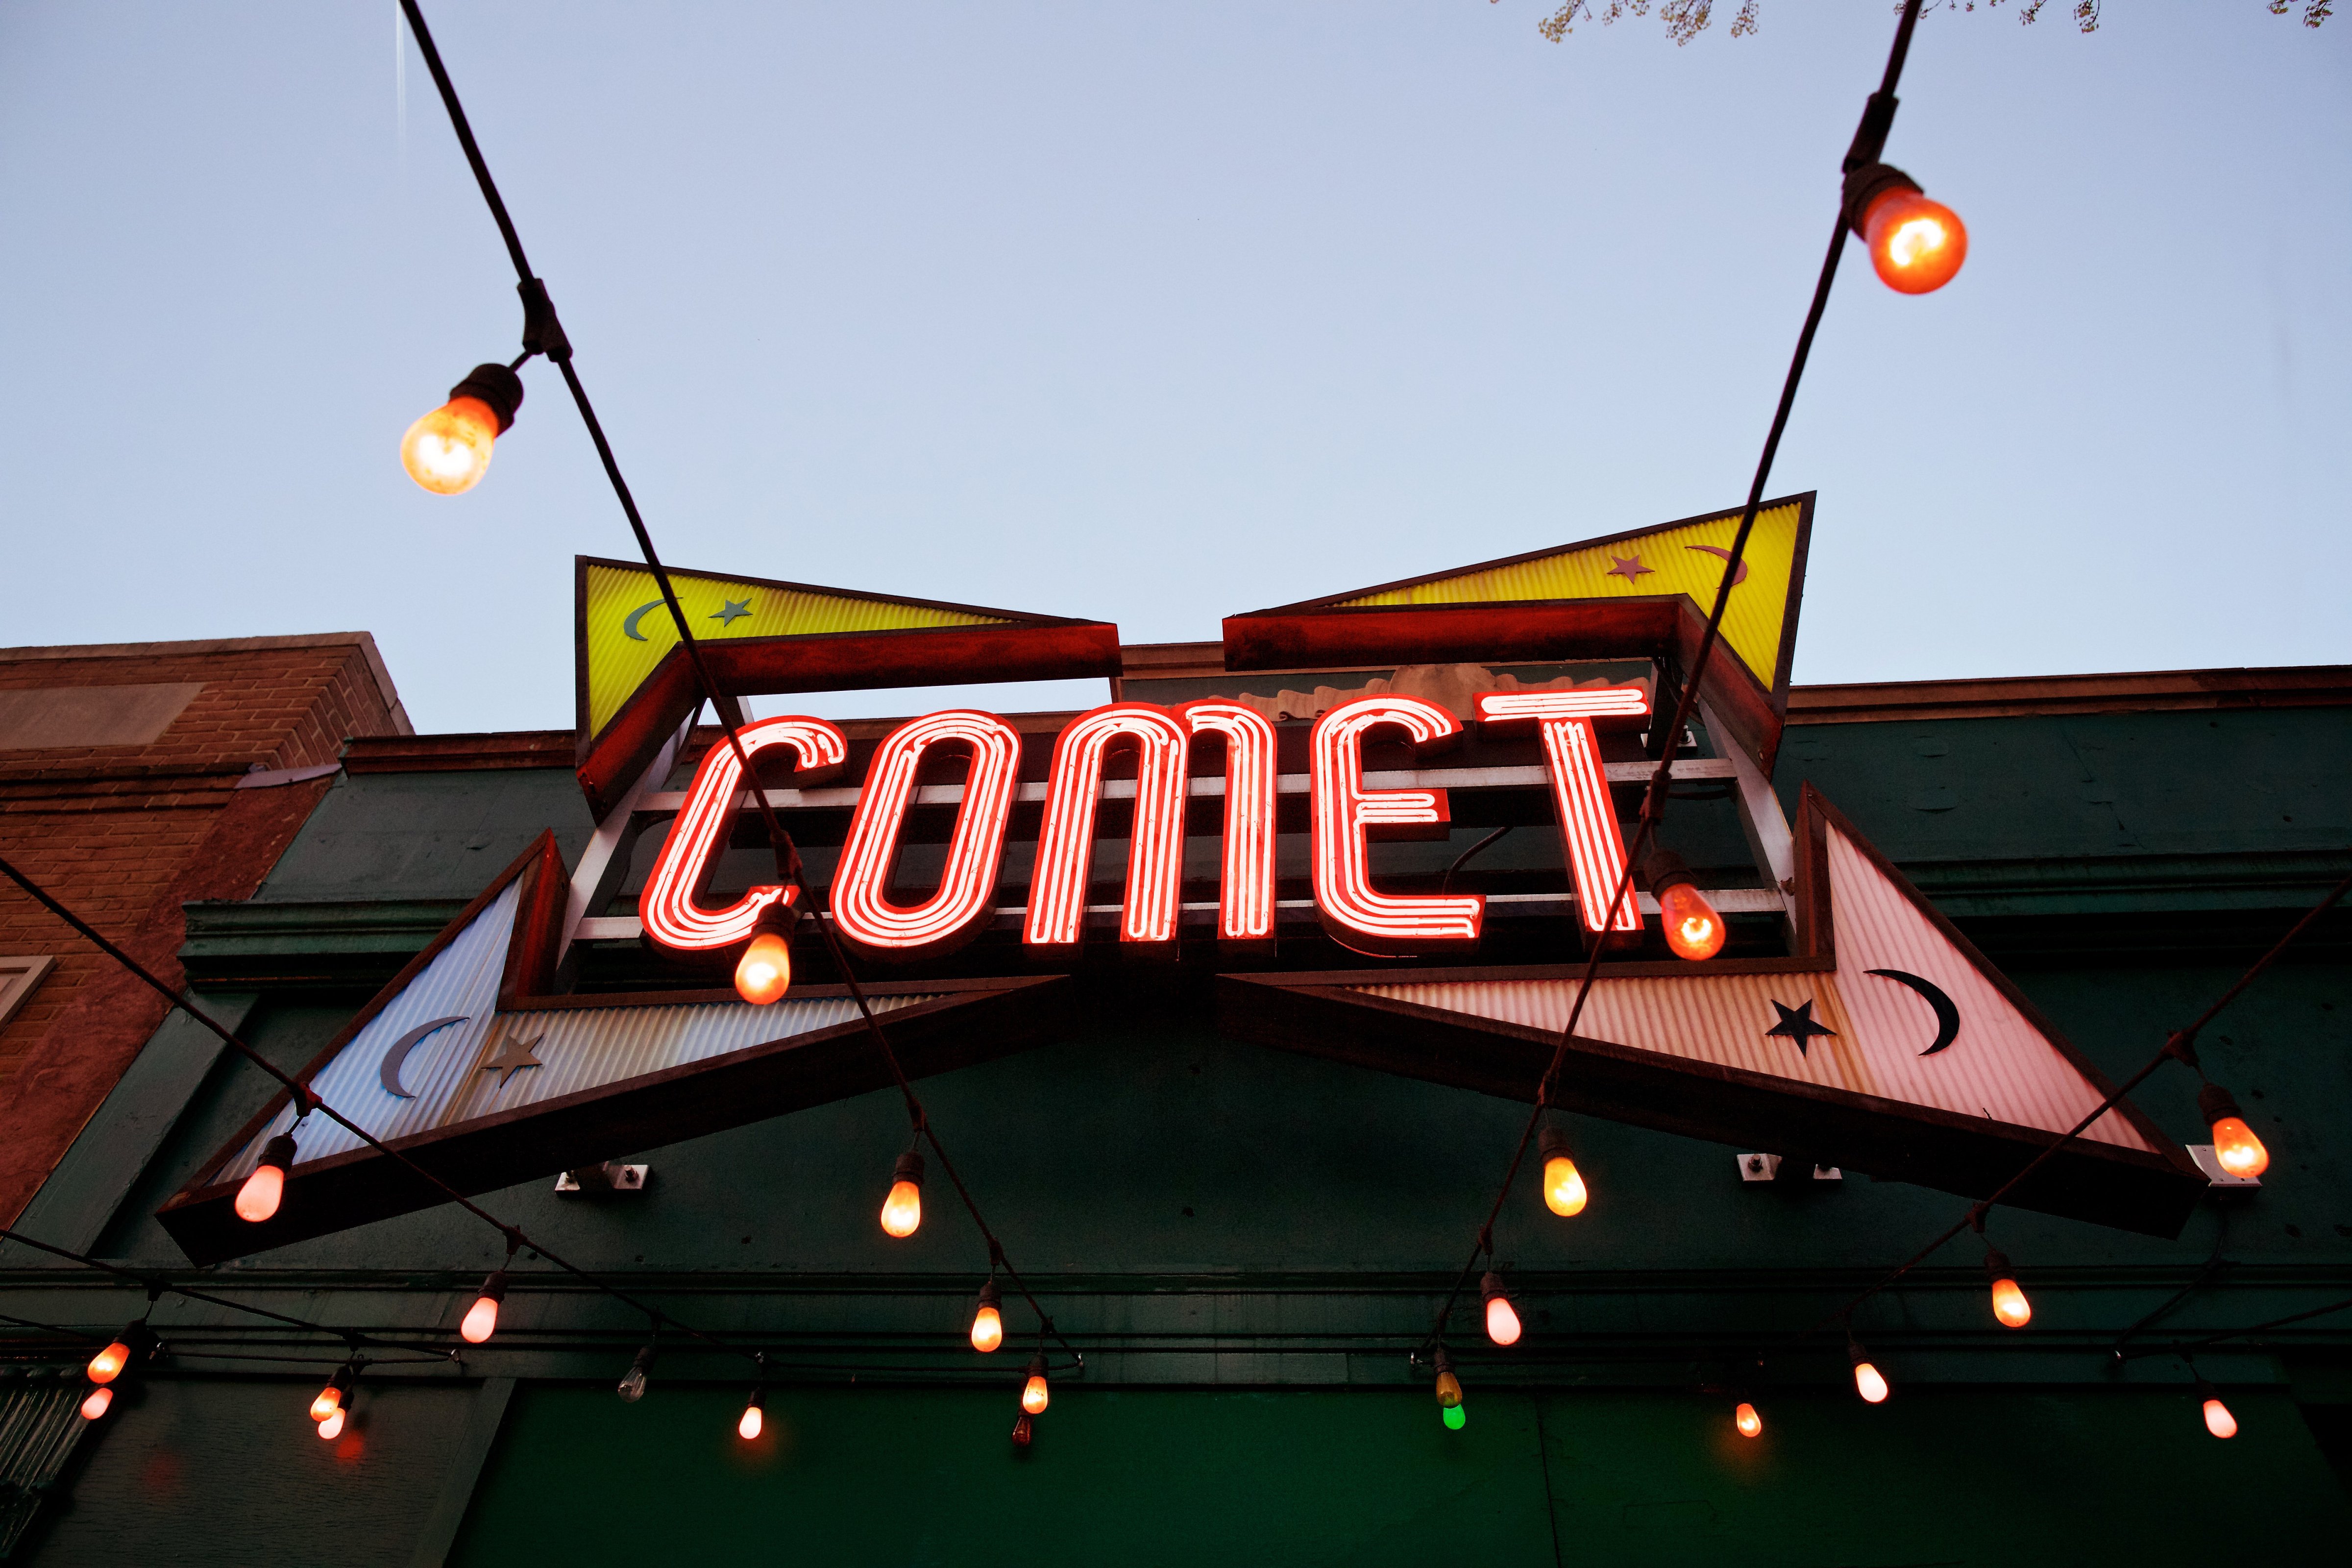 Exterior of Comet Ping Pong photographed in Washington, DC. (The Washington Post—The Washington Post/Getty Images)